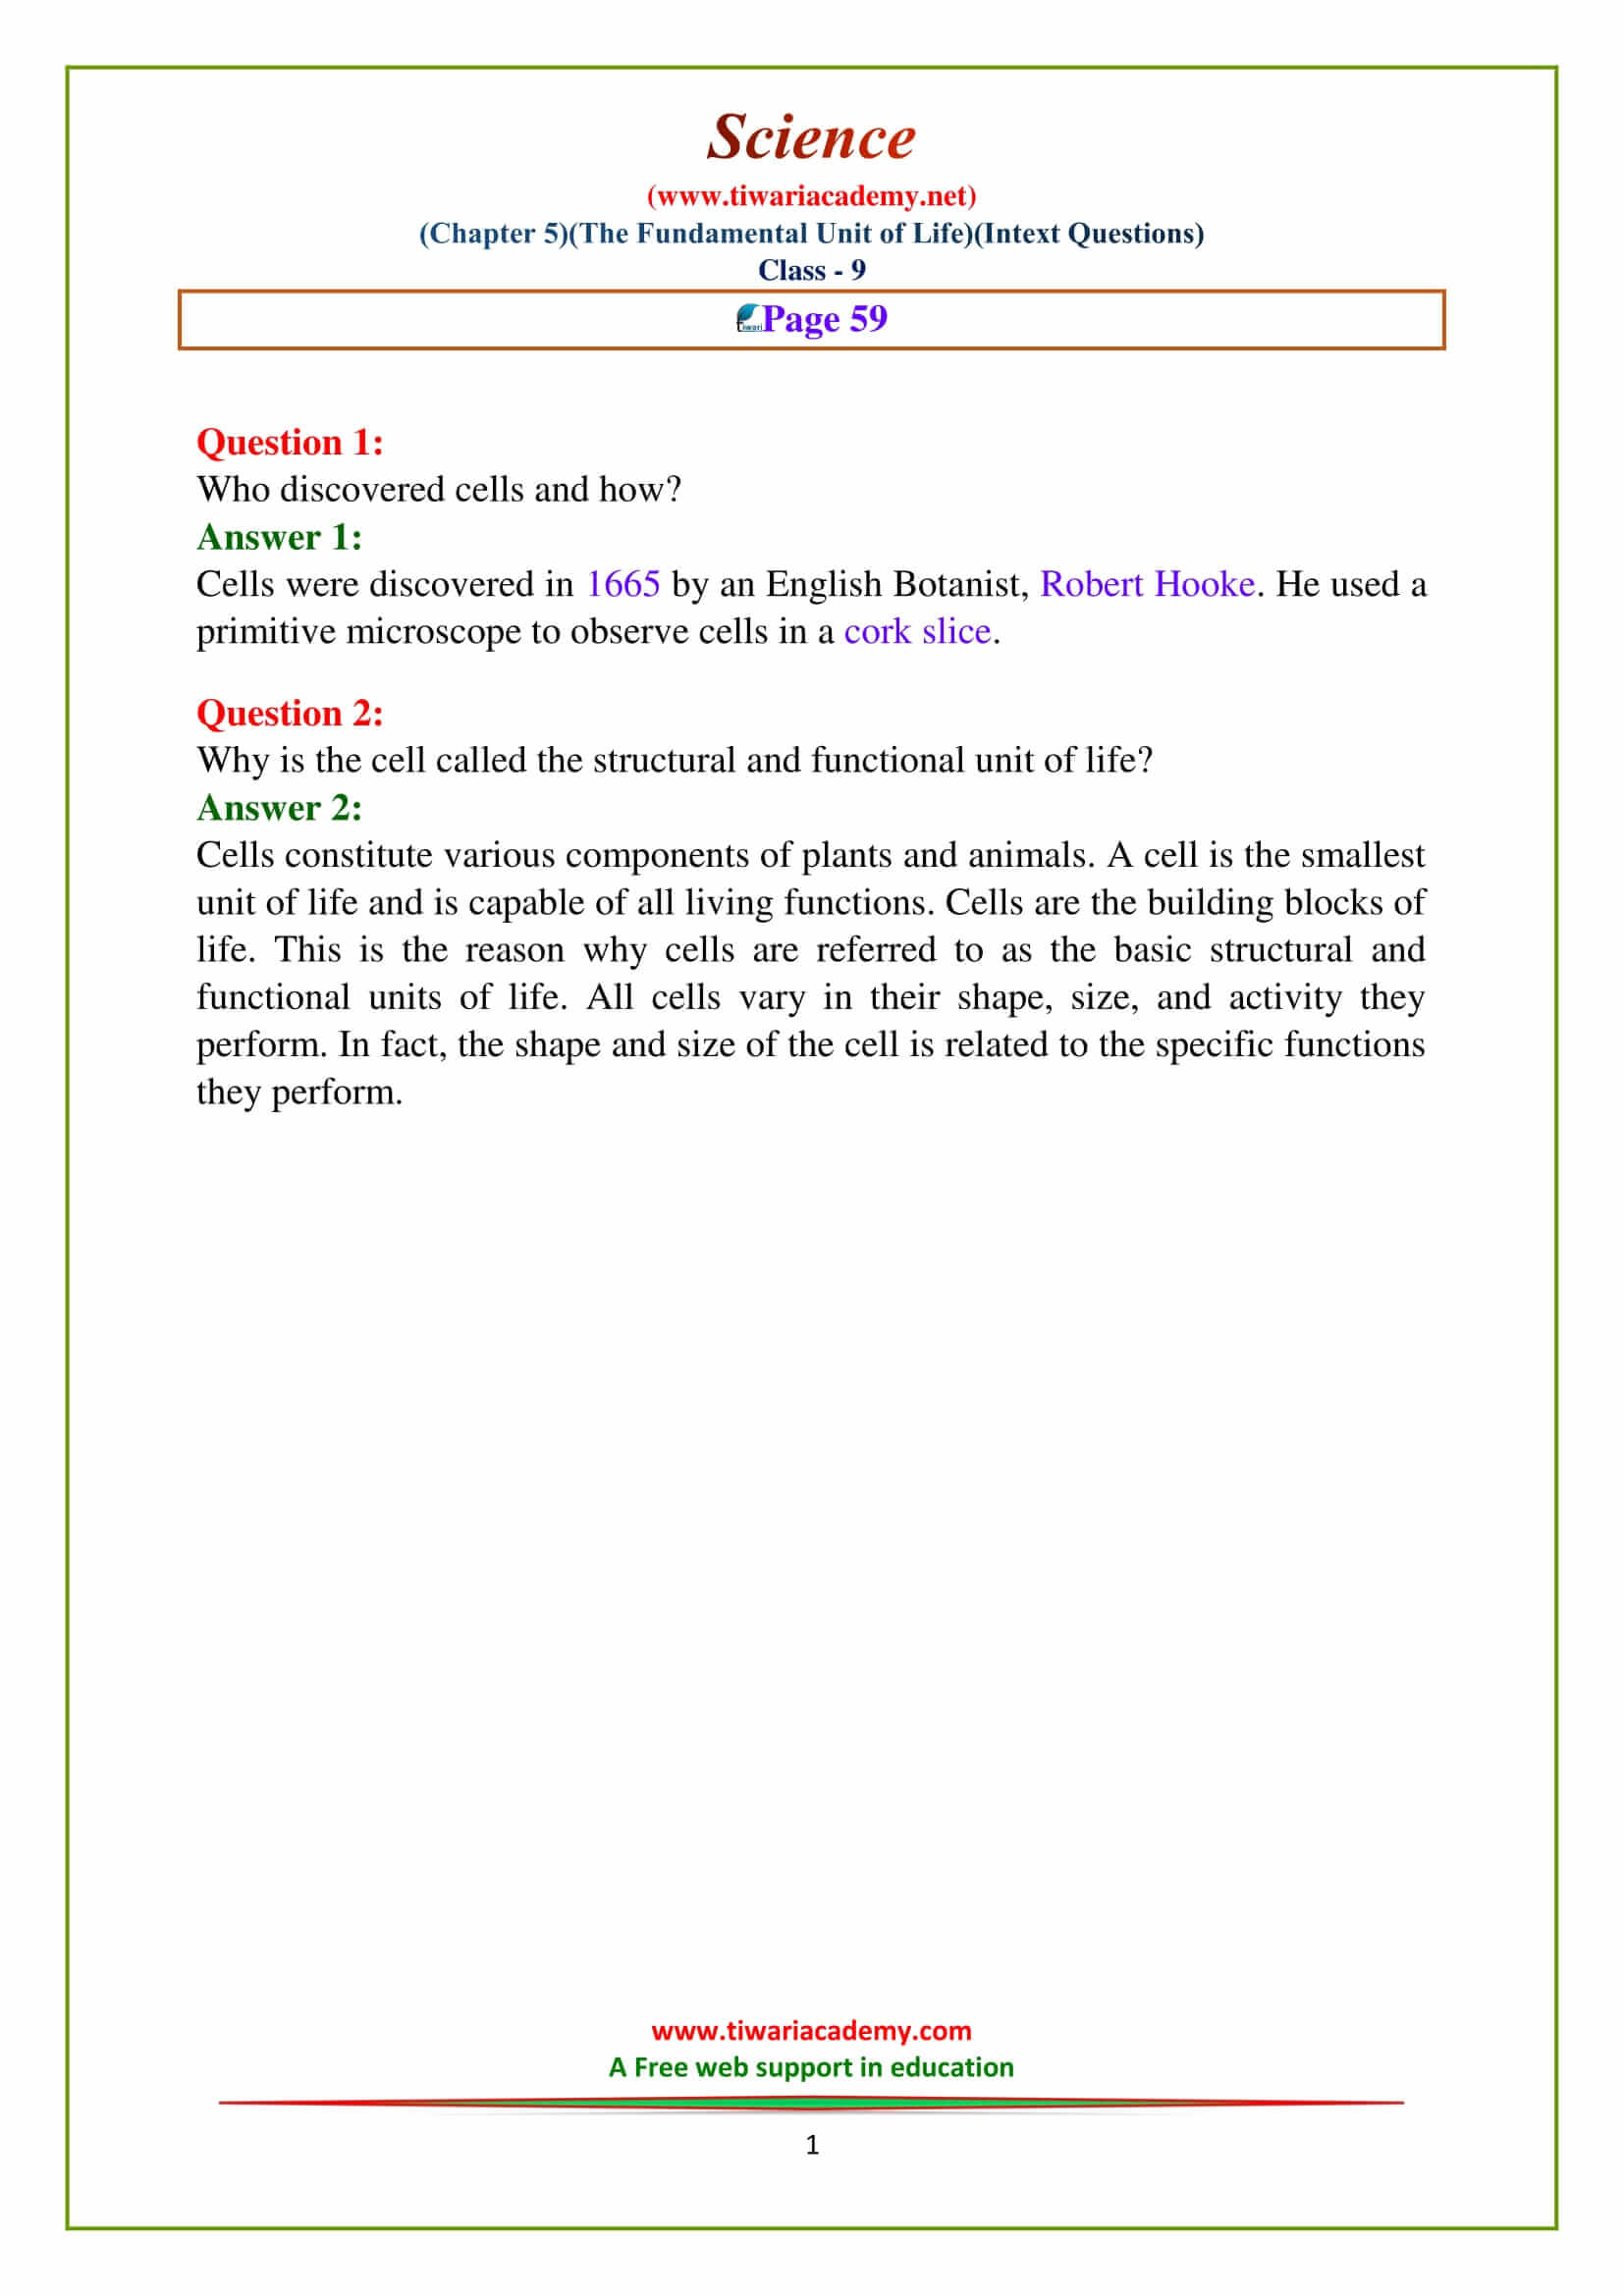 NCERT Solutions for Class 9 Science Chapter 5 The fundamental unit of life Intext questions of page 59